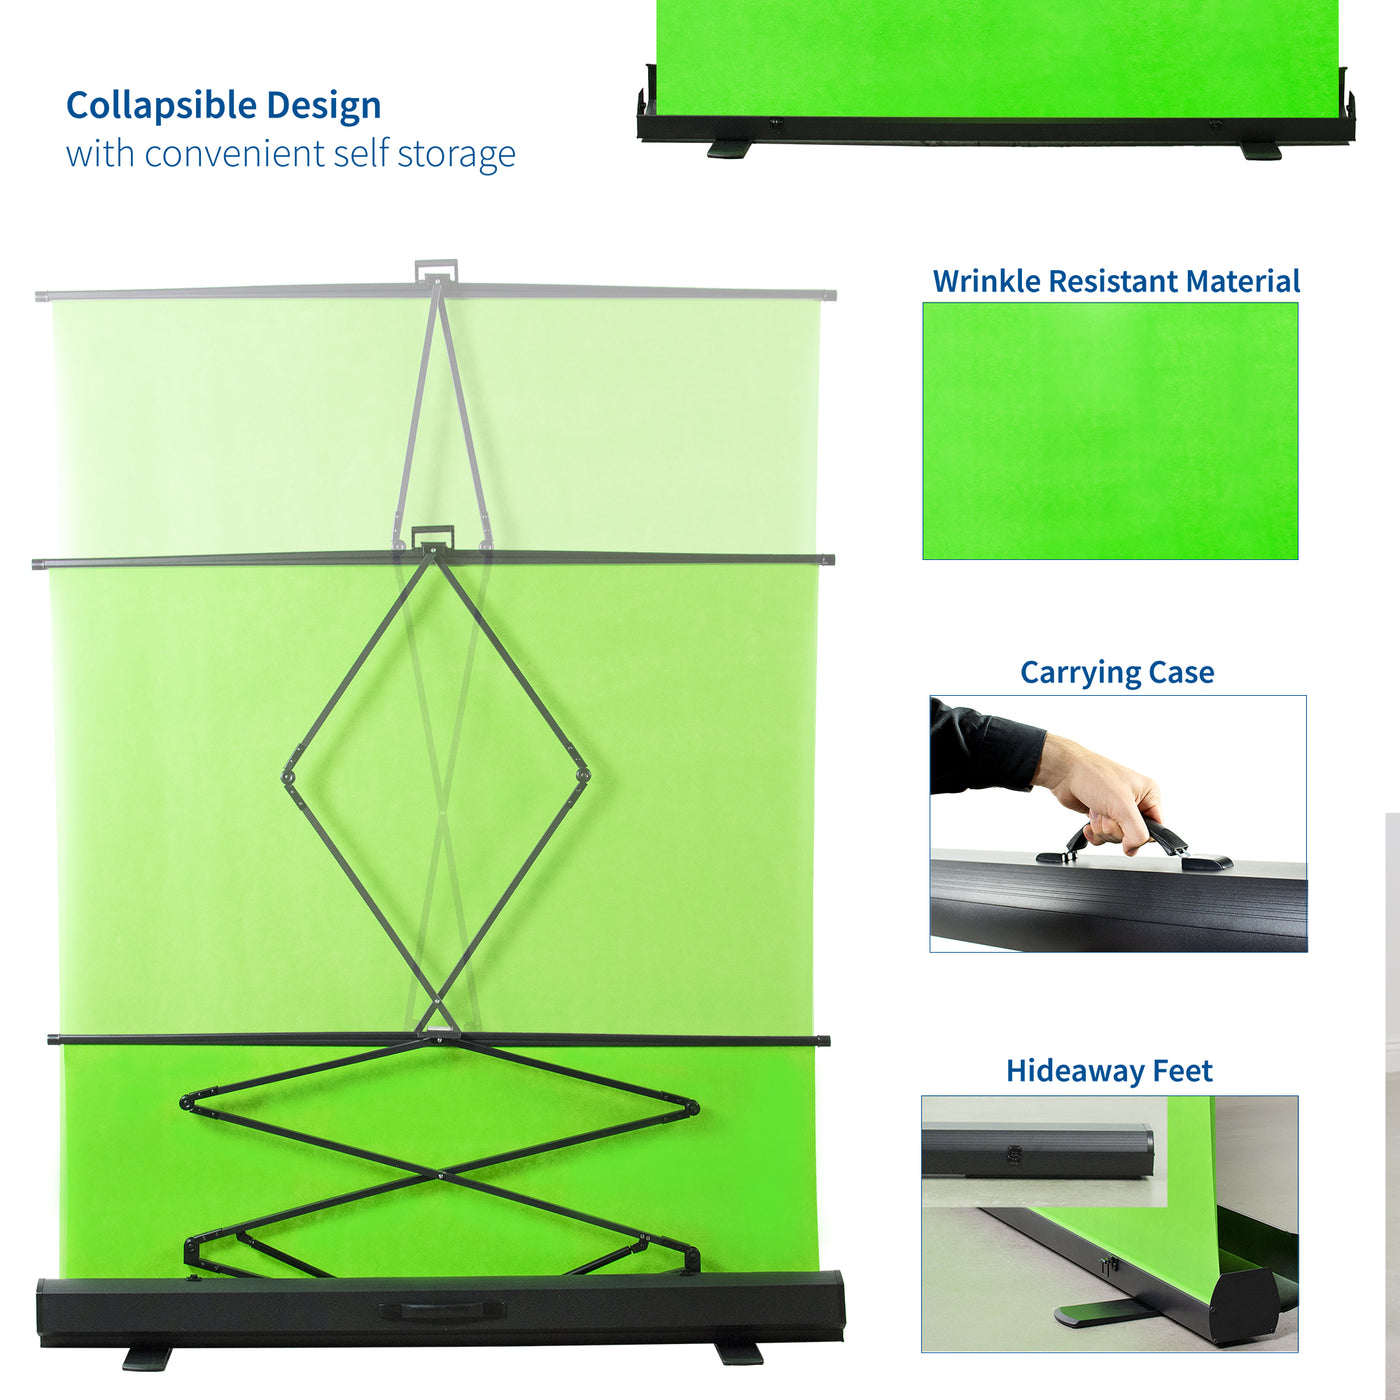 100" Collapsible Green Screen